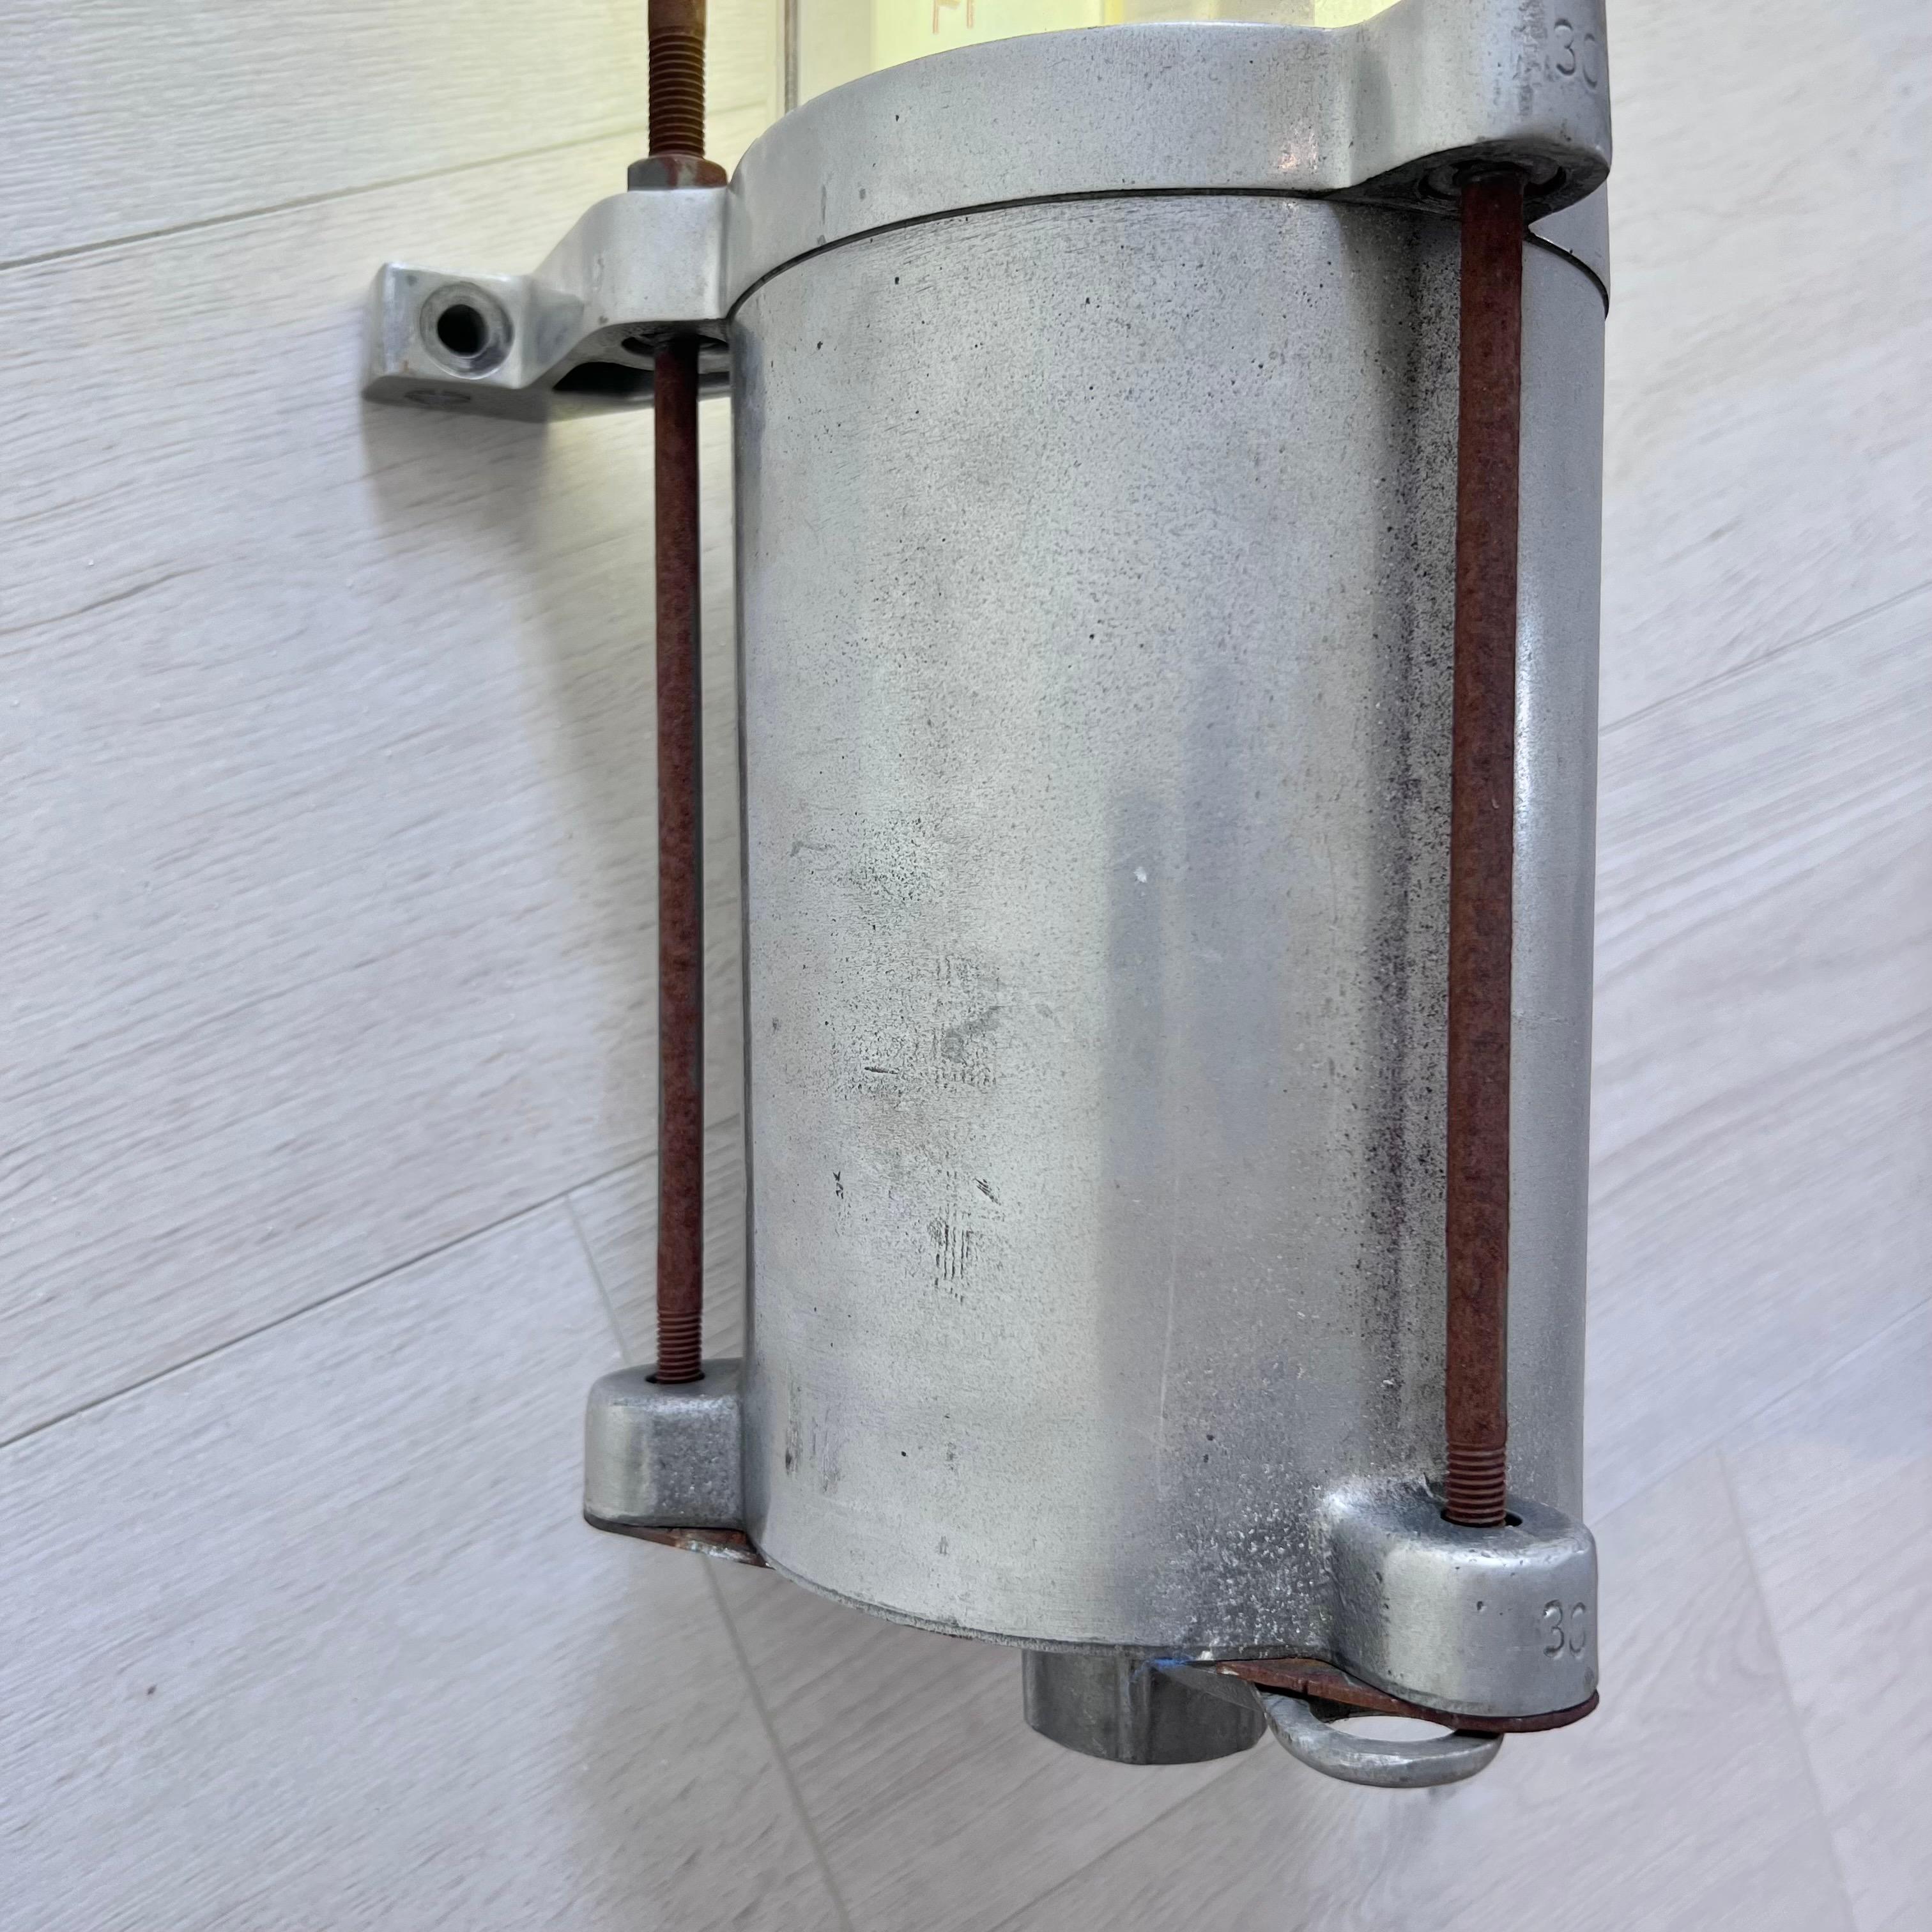 Explosion Proof Mining Lamp, 1970s, Germany For Sale 6